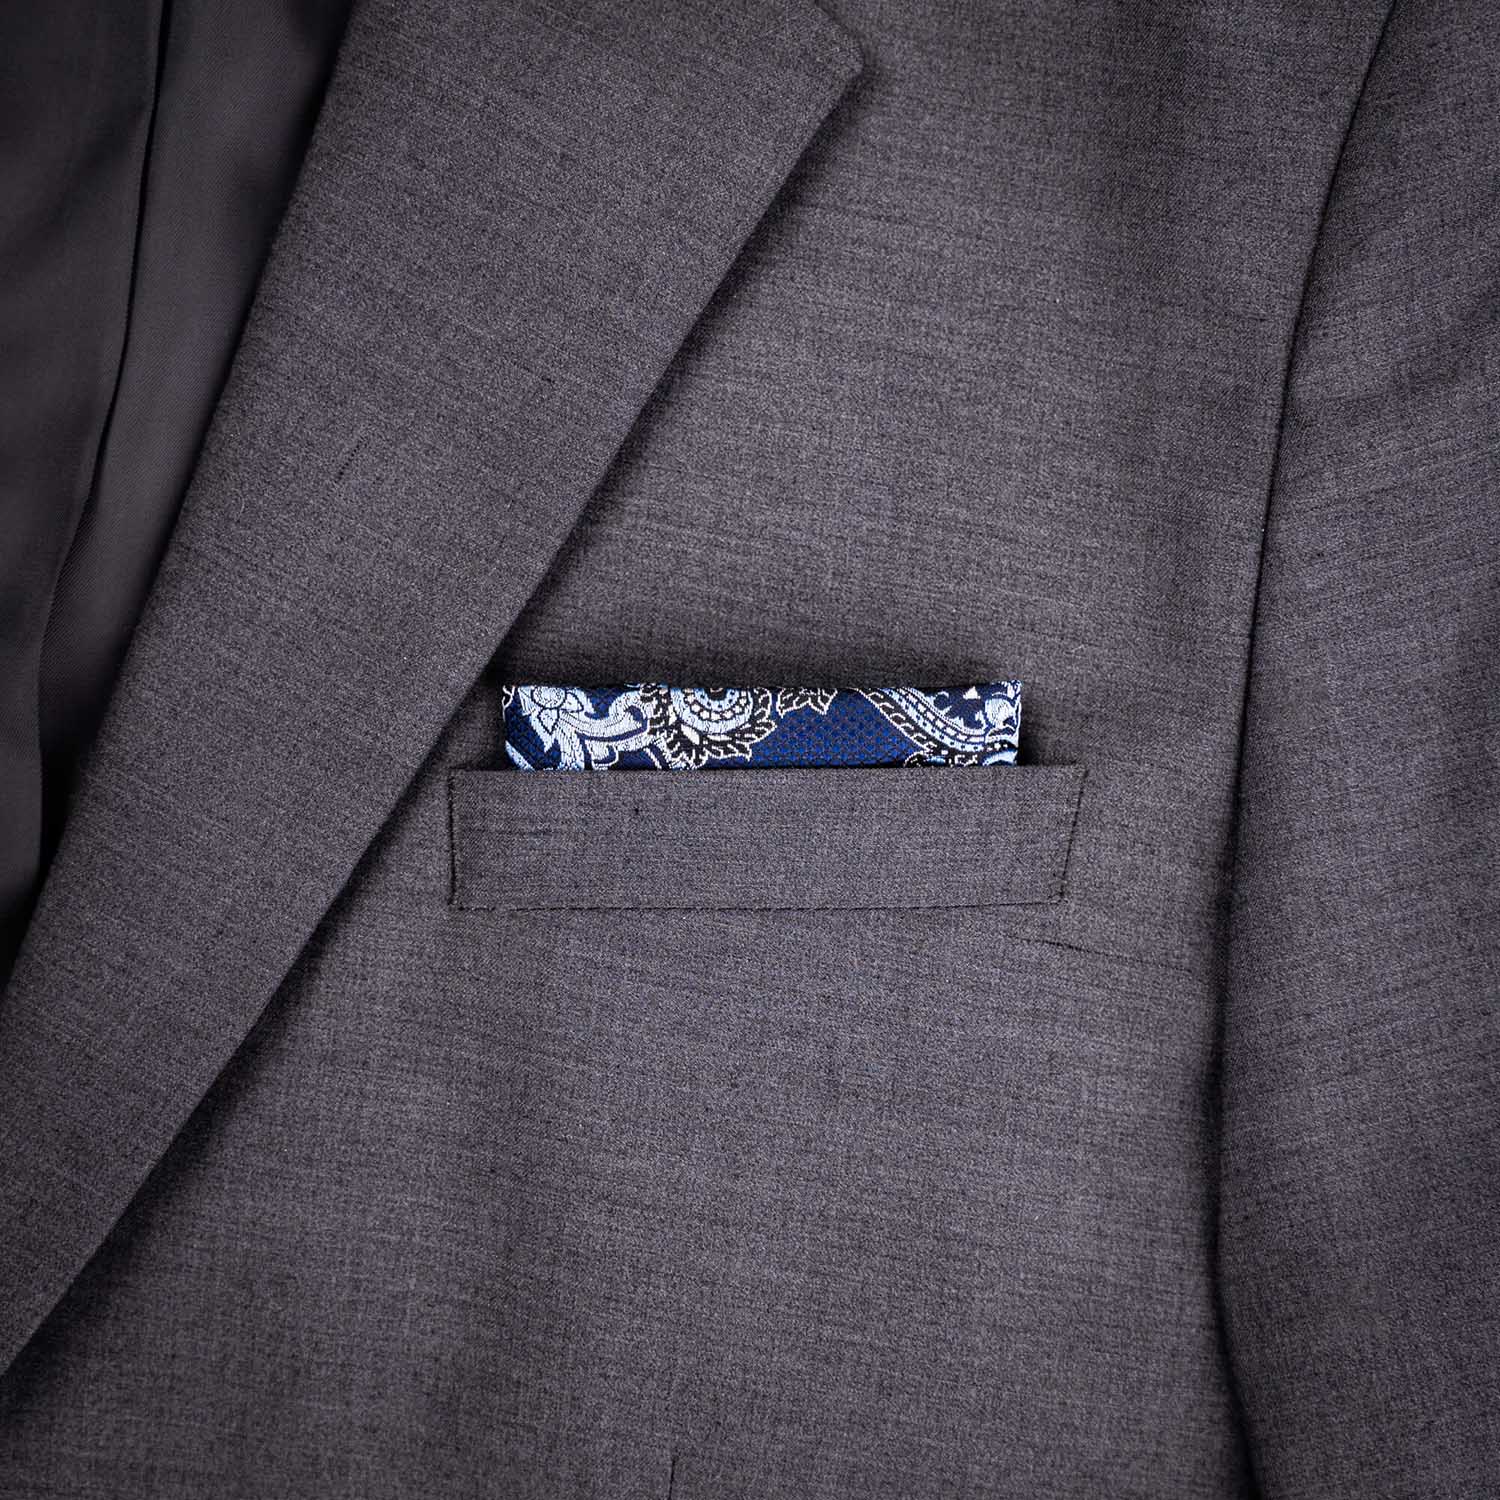 Pocket square for navy suit